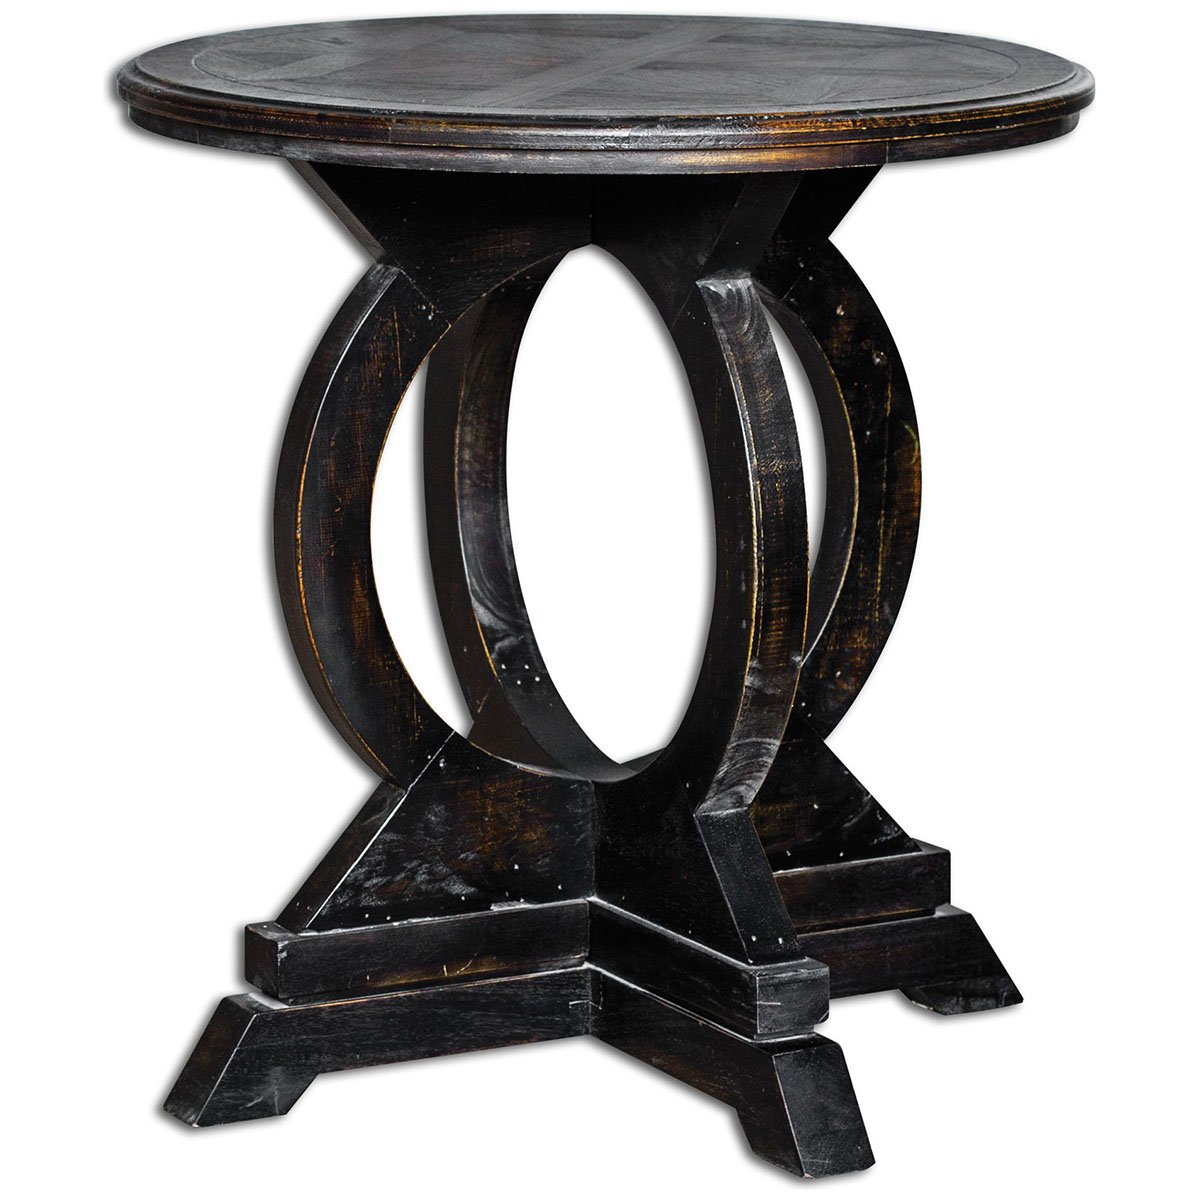 uttermost maiva accent table black kitchen dining round metal rattan side antique oval mosaic top coffee half circle drawer pulls and knobs nautical flush mount light tables for